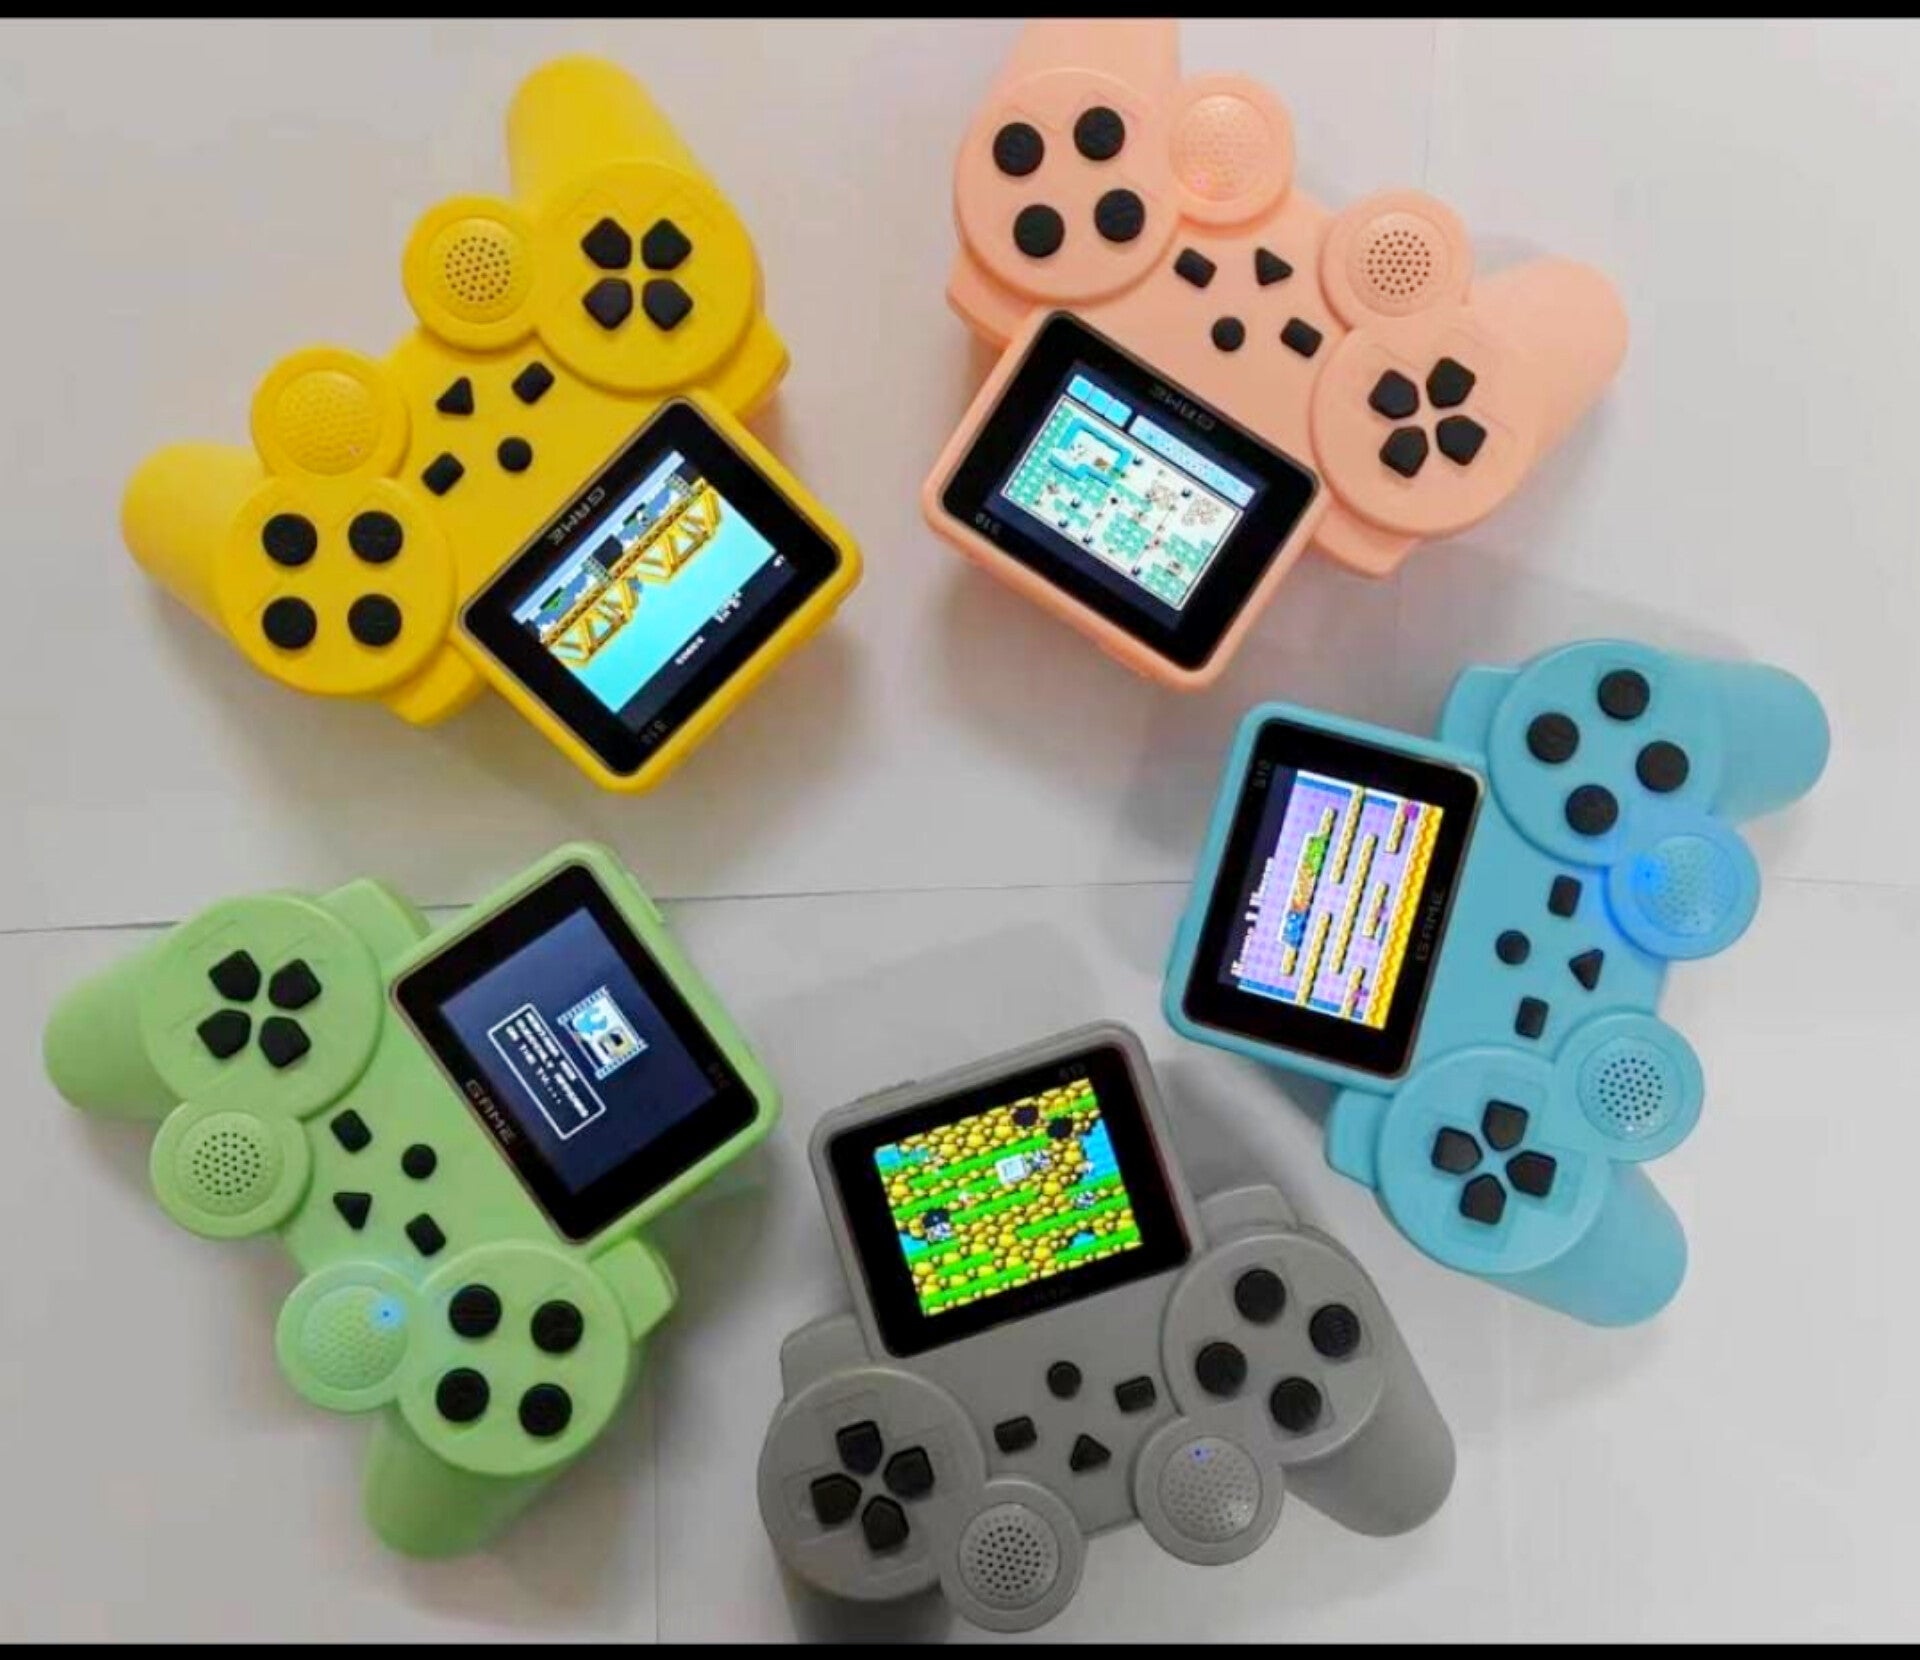 520 Classic Games Handheld Game Console for Kids